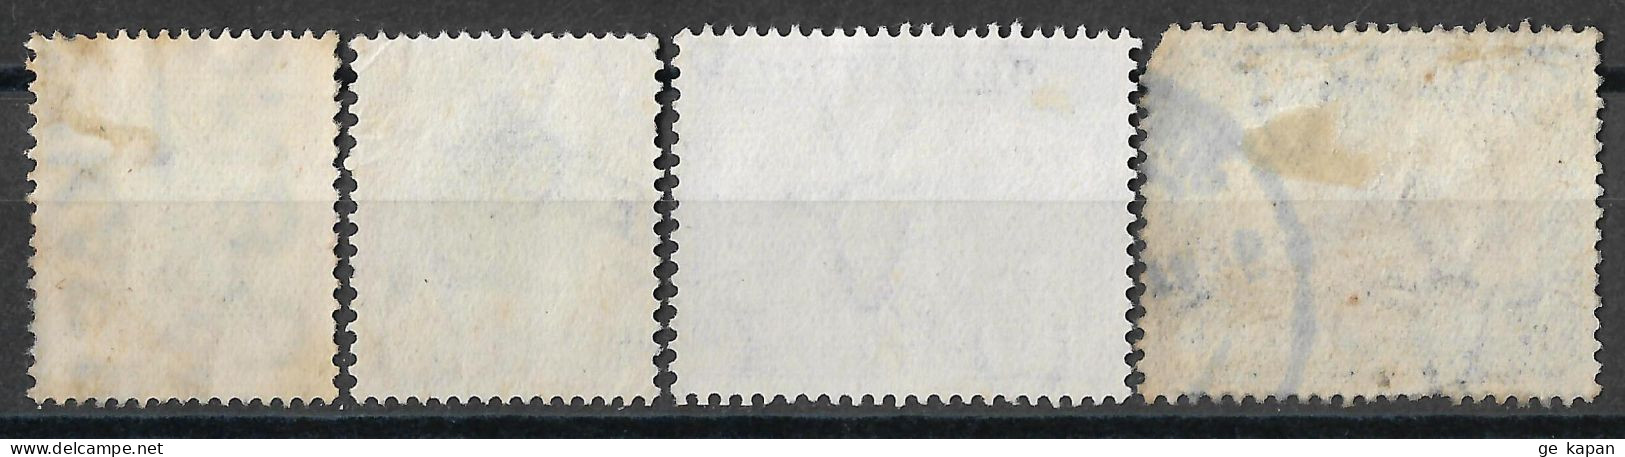 1926-1931 SOUTH AFRICA Set Of 4 USED STAMPS (Scott # 24b,25a,36a,43b) CV $3.95 - Usati